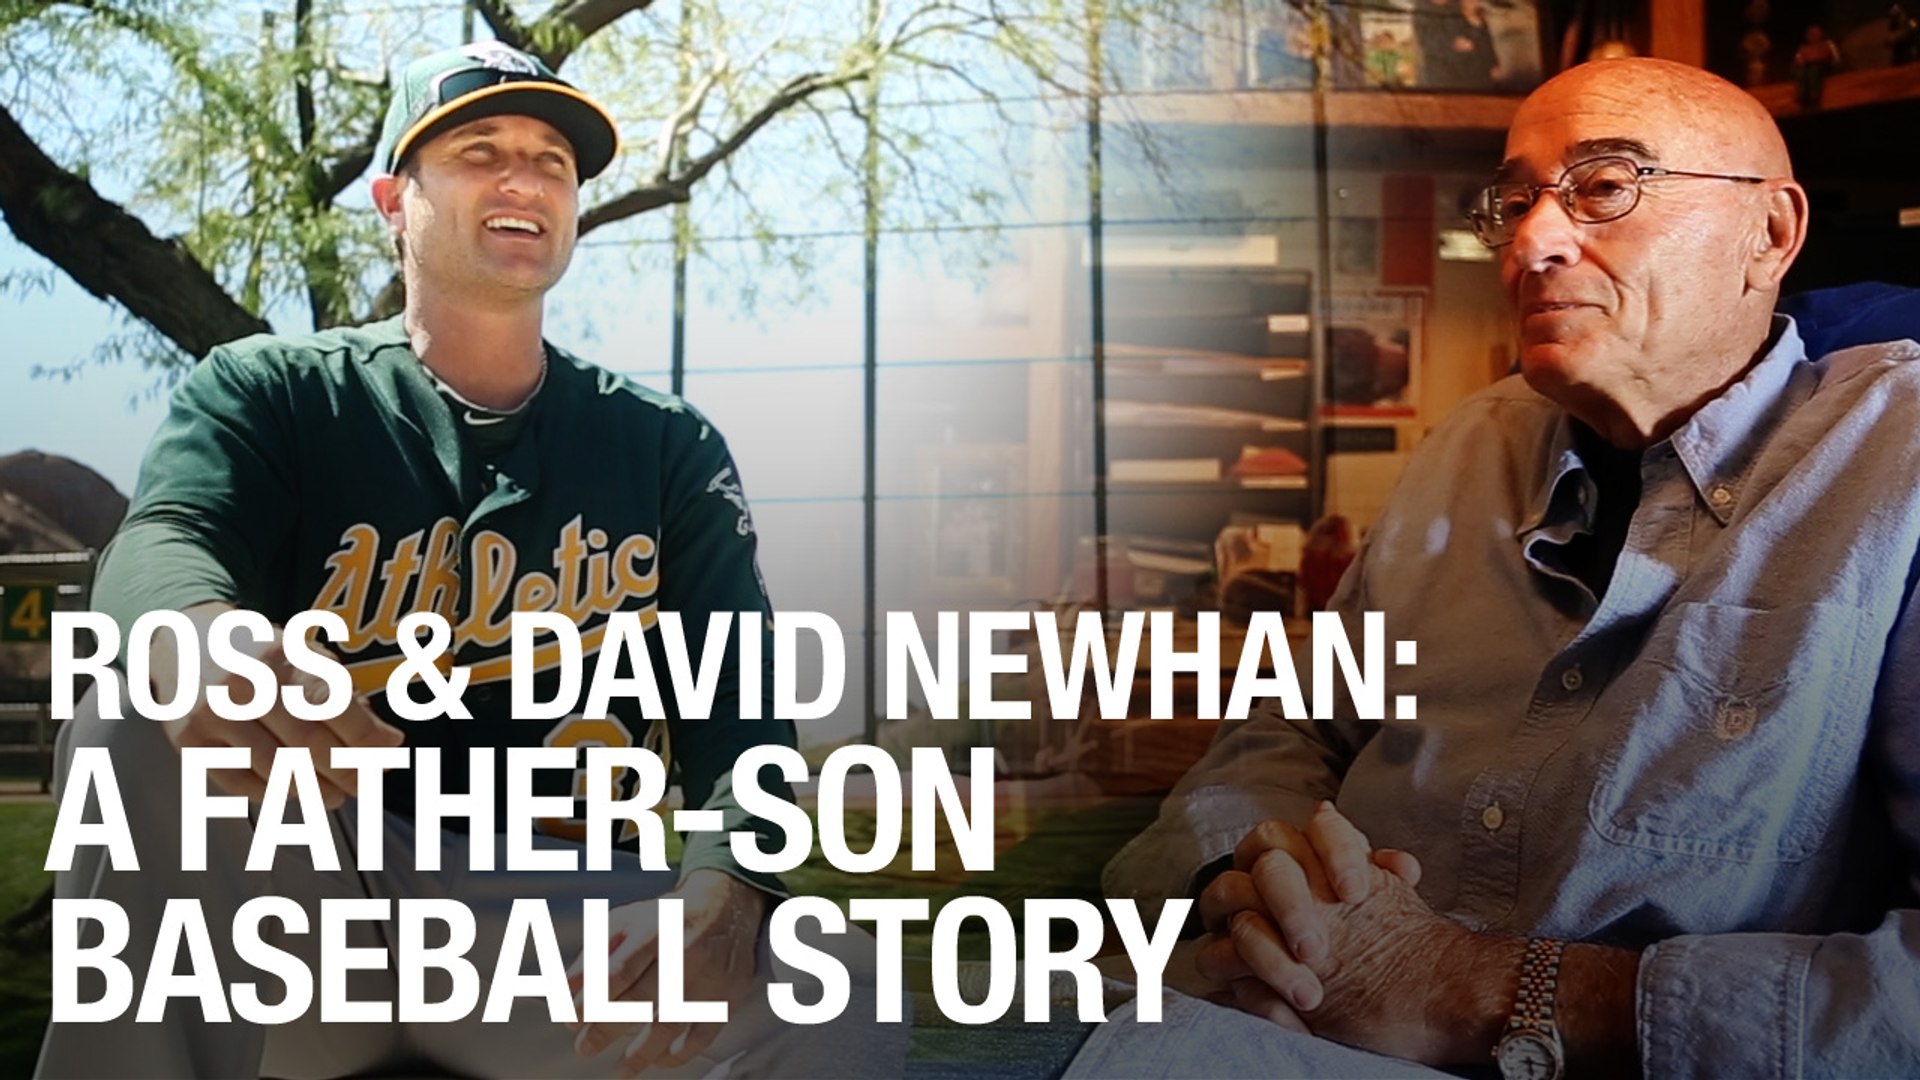 Ross And David Newhan: A Father-Son Baseball Story - video Dailymotion